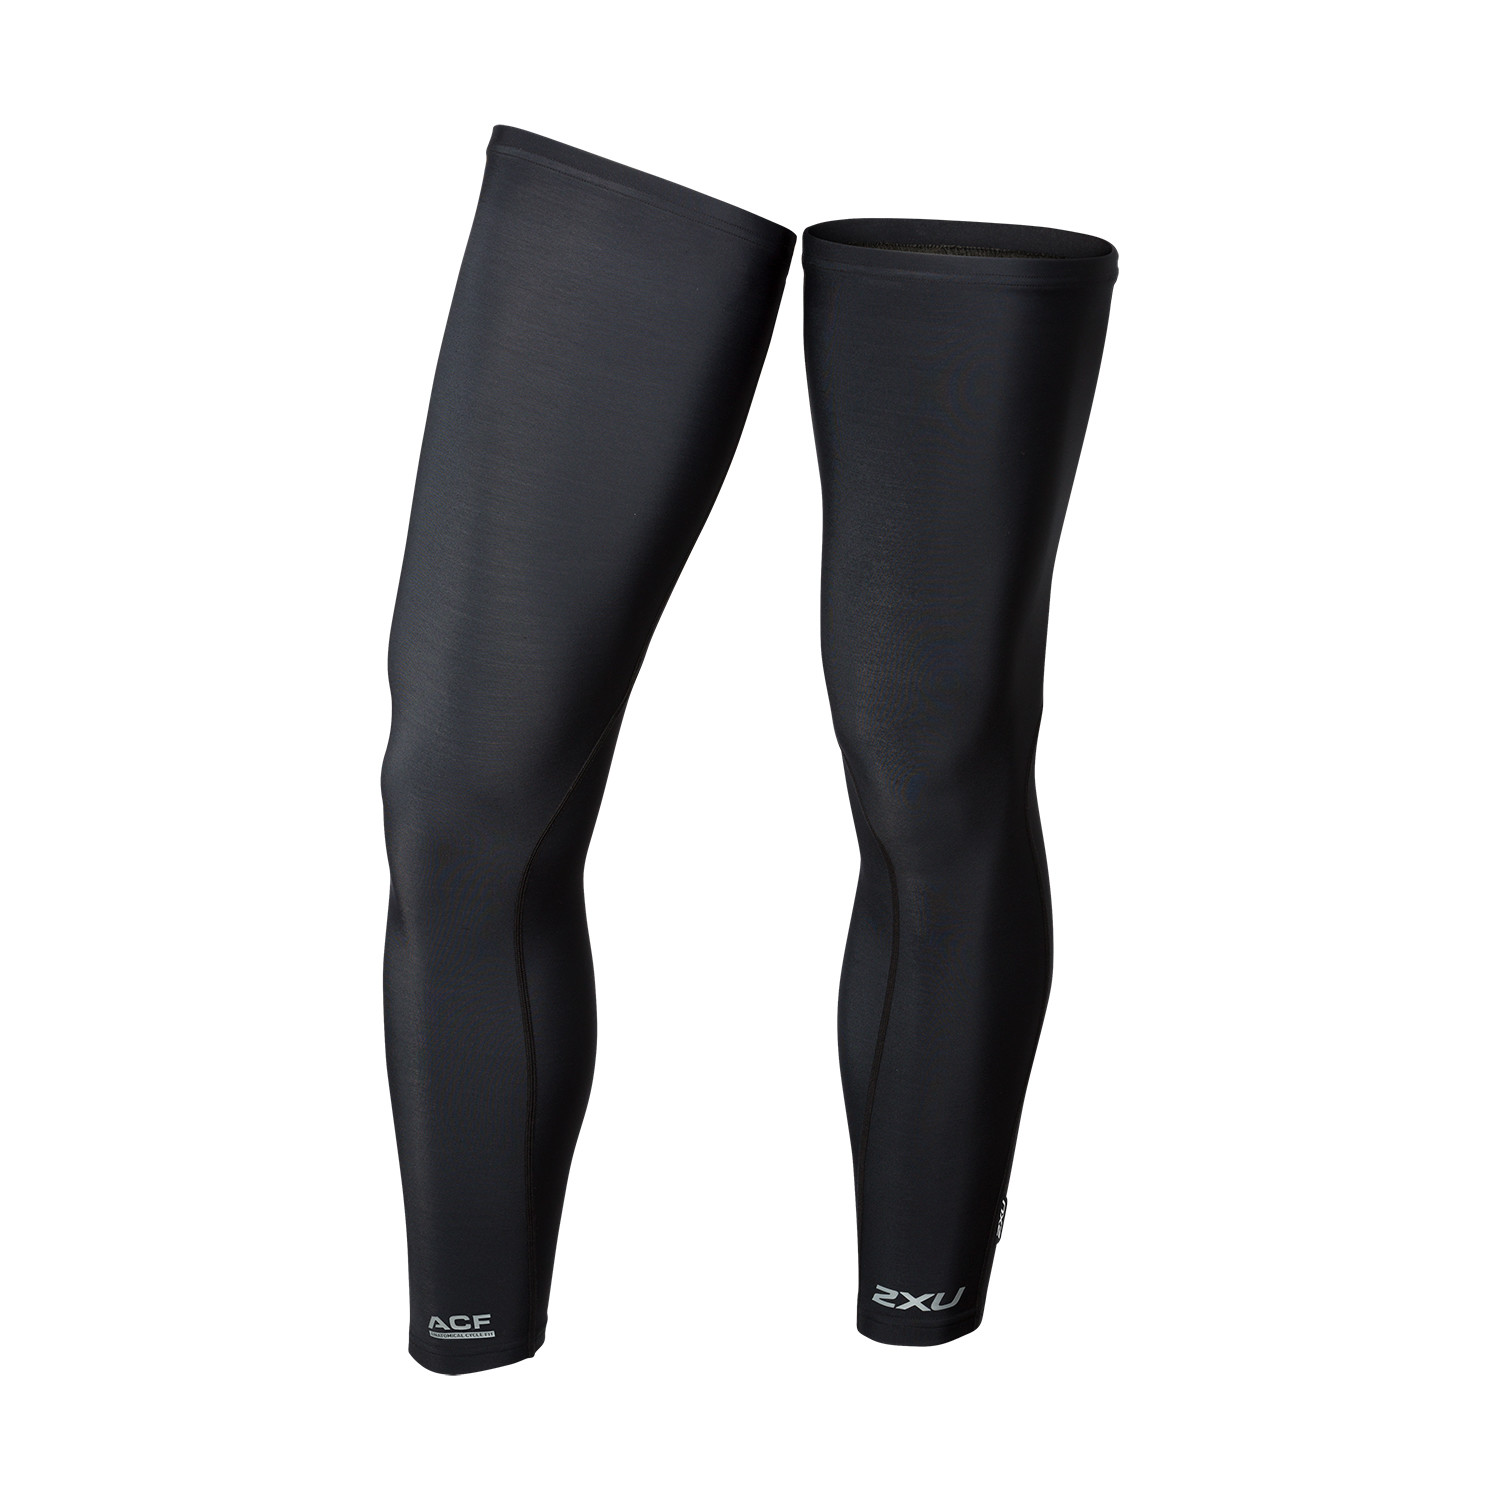 Thermal Cycle Leg Warmers Black - 2xU - Touch of Modern